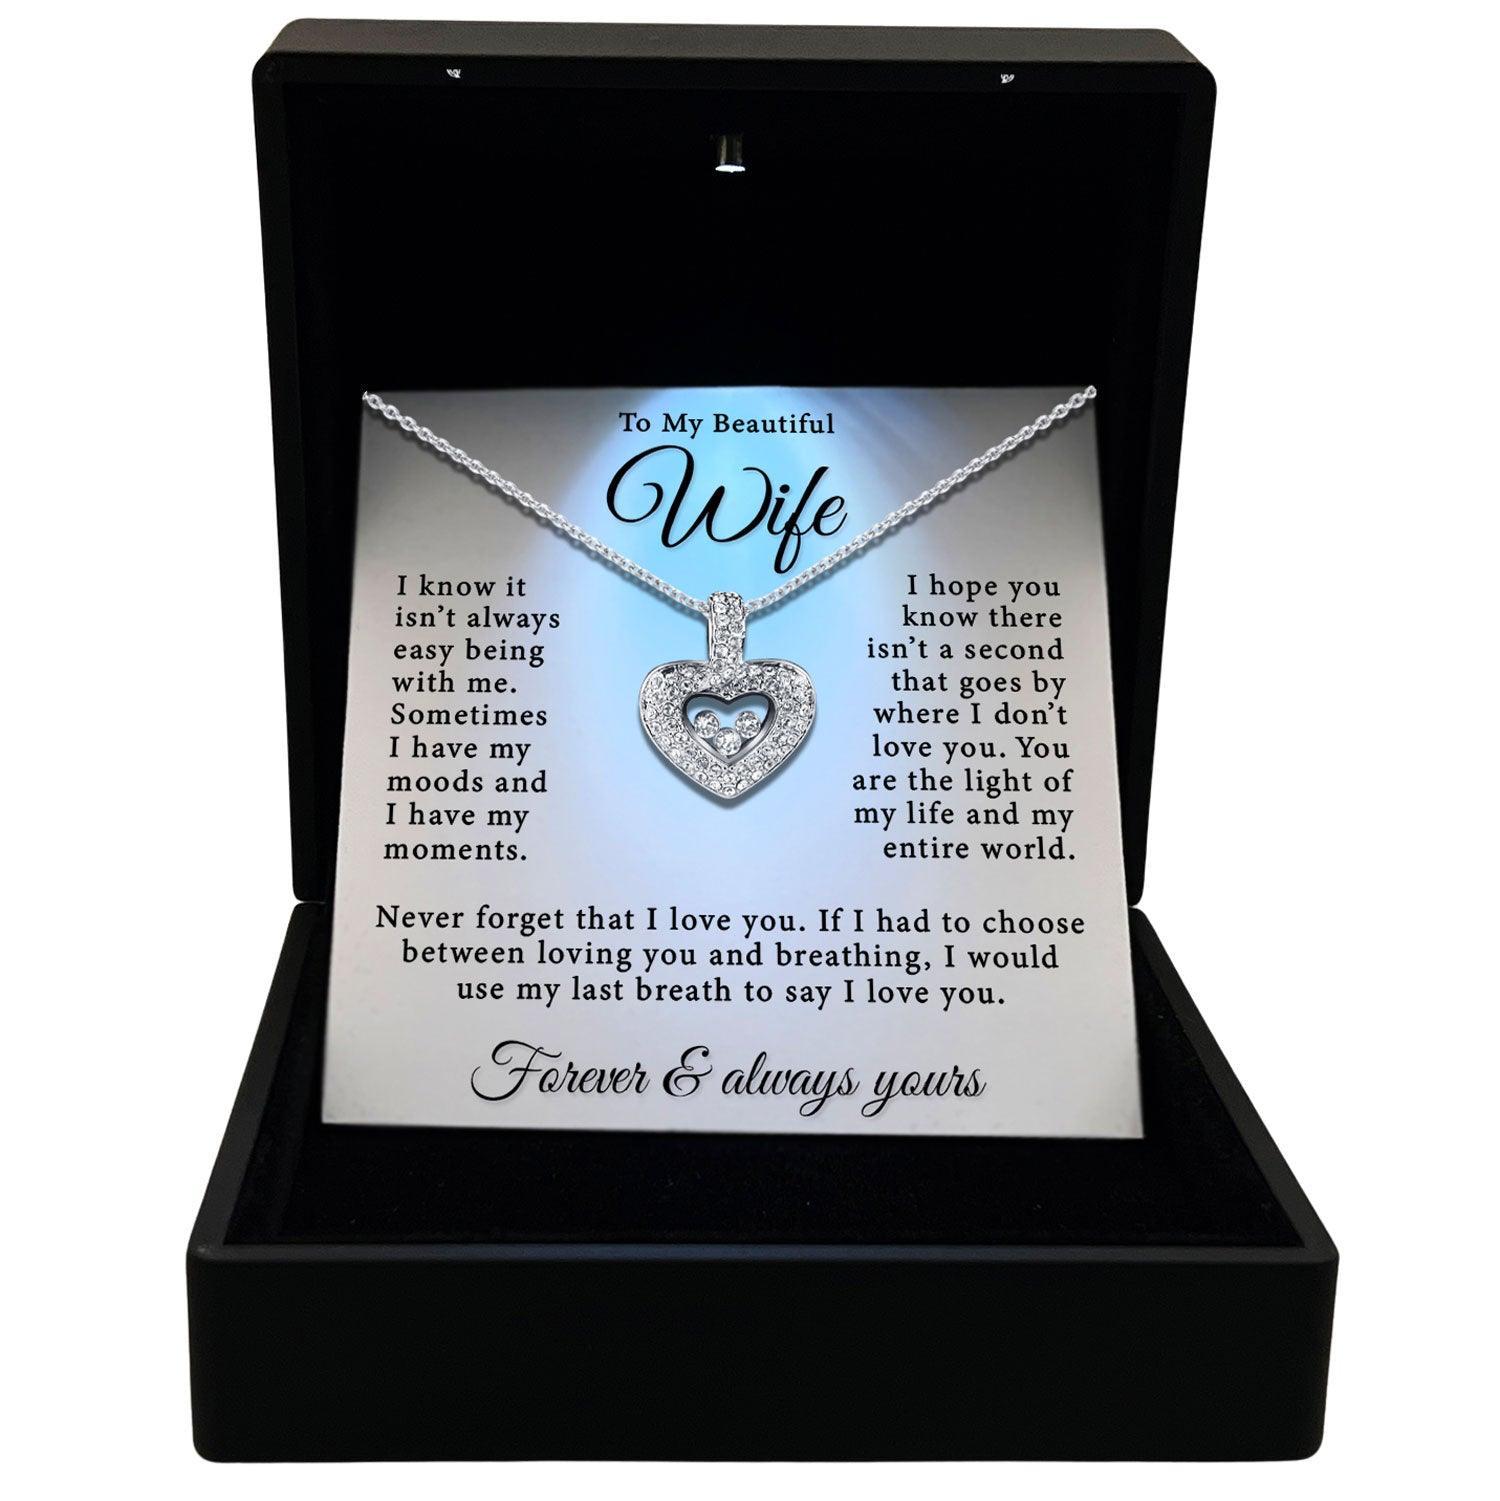 To My Beautiful Wife - You Are The Light Of My Life and My Entire World - Tryndi Floating Heart Necklace - TRYNDI